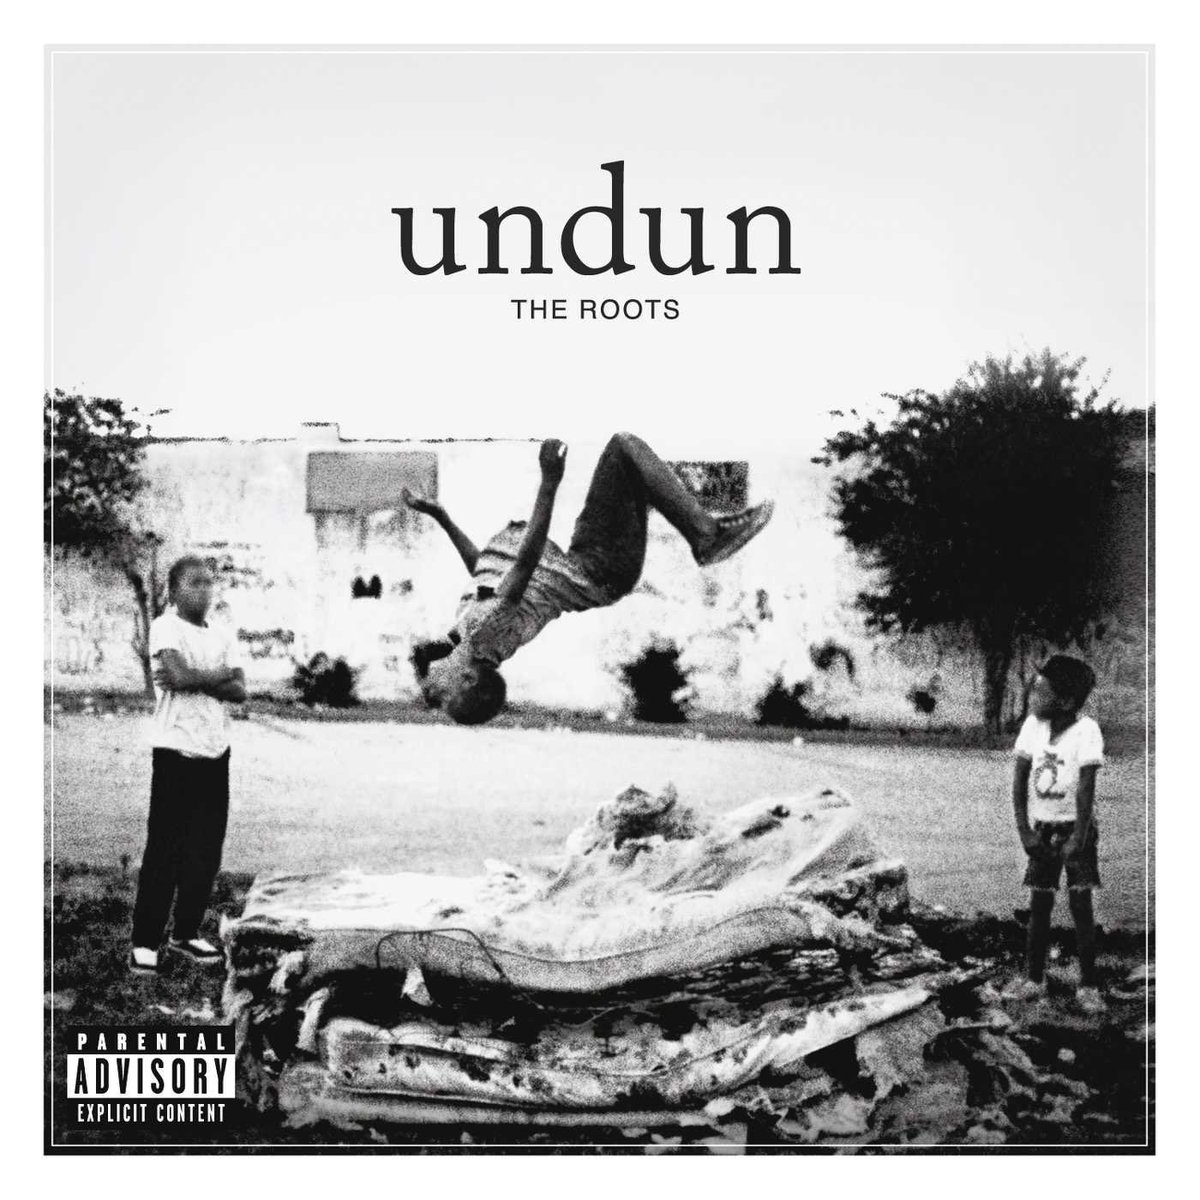 2011: Undun - The RootsQuite possibly one of the best concept albums of all time, Black Thought displays why he’s undoubtedly one of the goatsFave tracks: make my, sleep, finalityHm: House of Balloons, Take Care, Carter IV